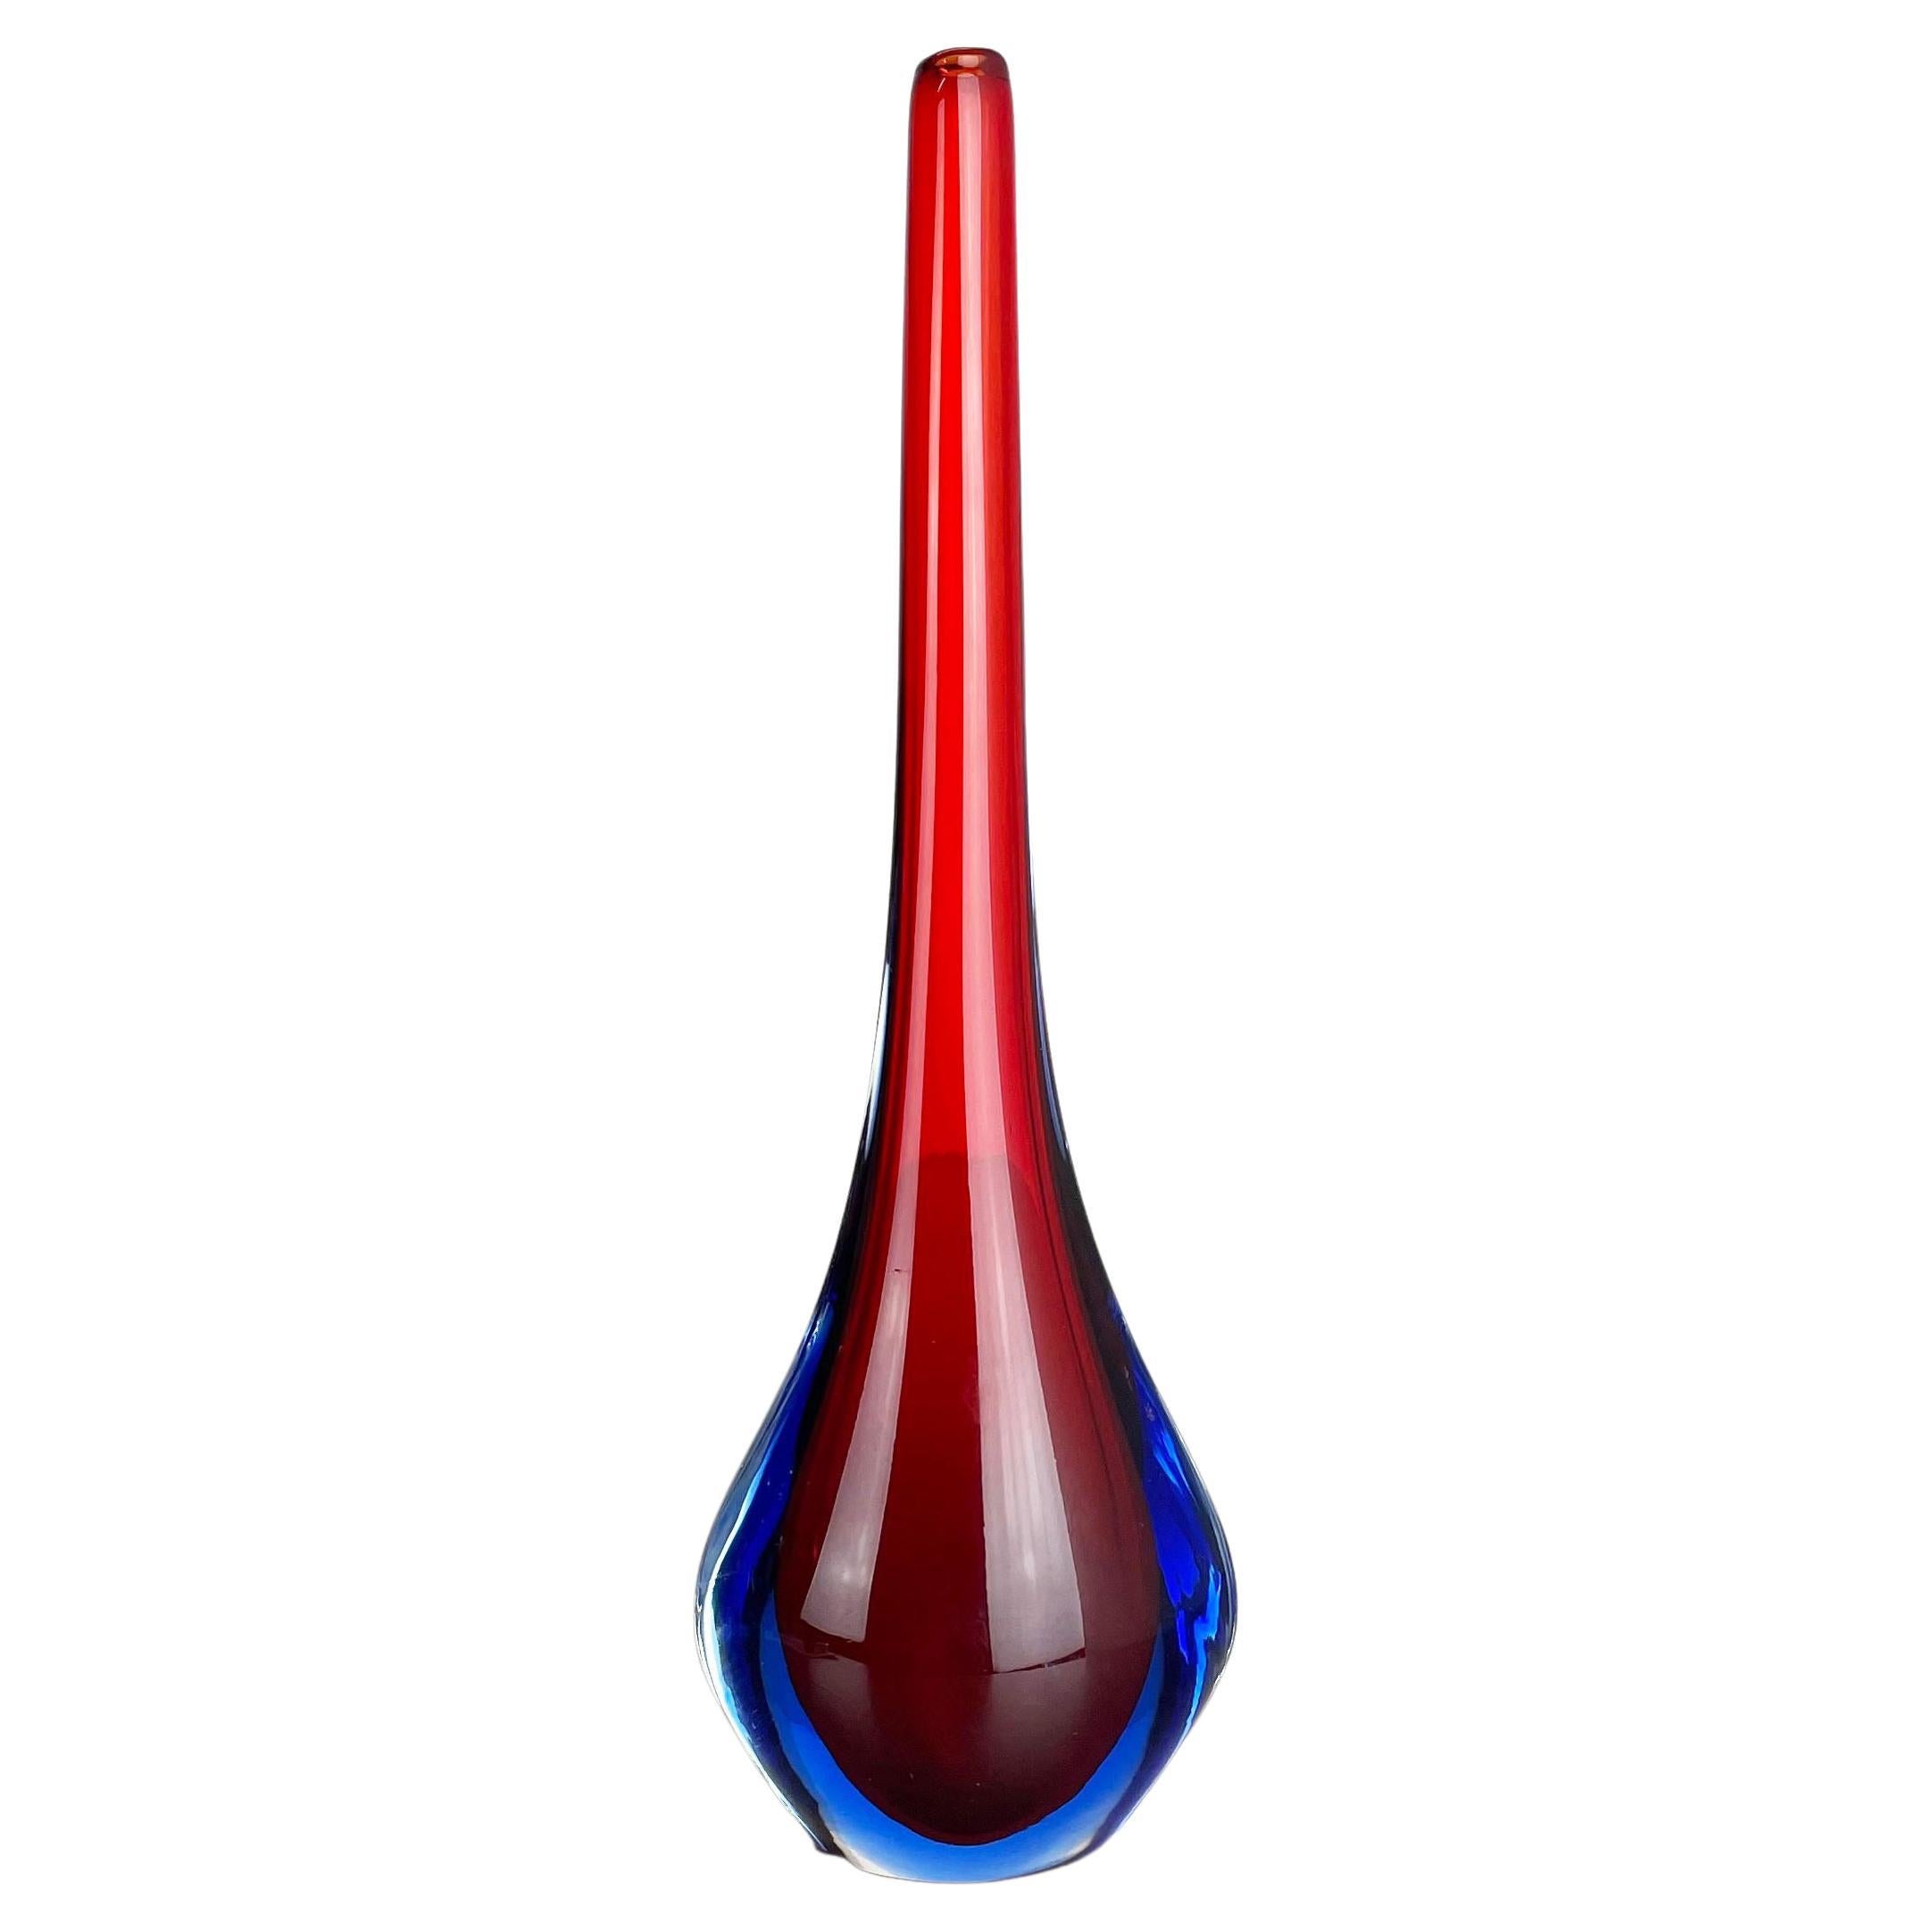 Large 1960s Murano Glass Sommerso 29cm Single-Stem Vase by Flavio Poli, Italy For Sale